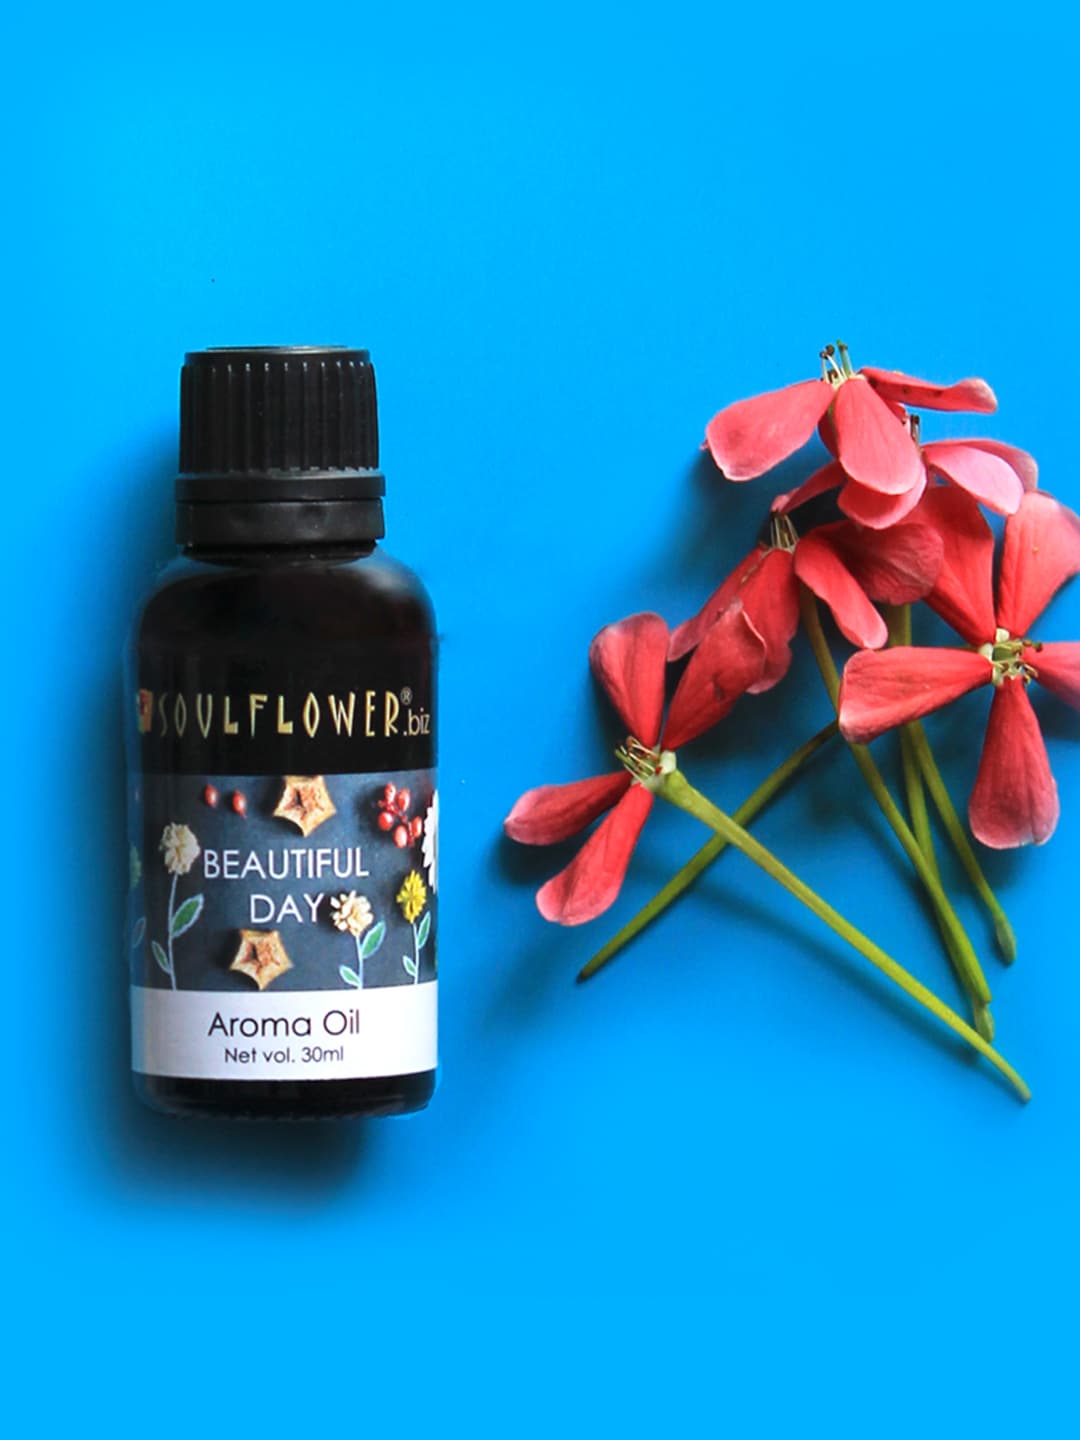 Soulflower Beautiful Day Aroma Oil 30ml Price in India